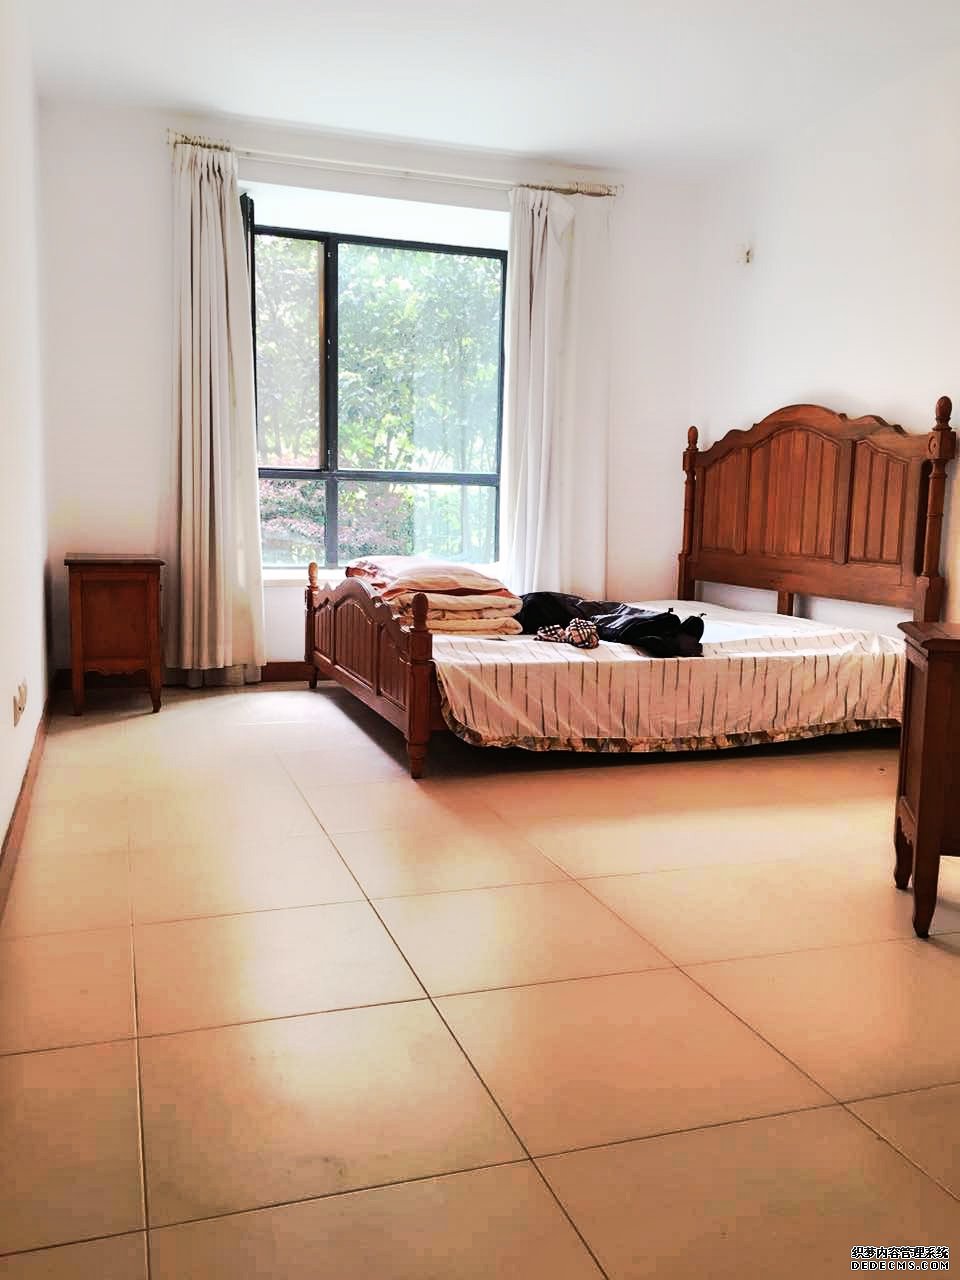  160sqm 3BR Apartment for rent next to Changping Road